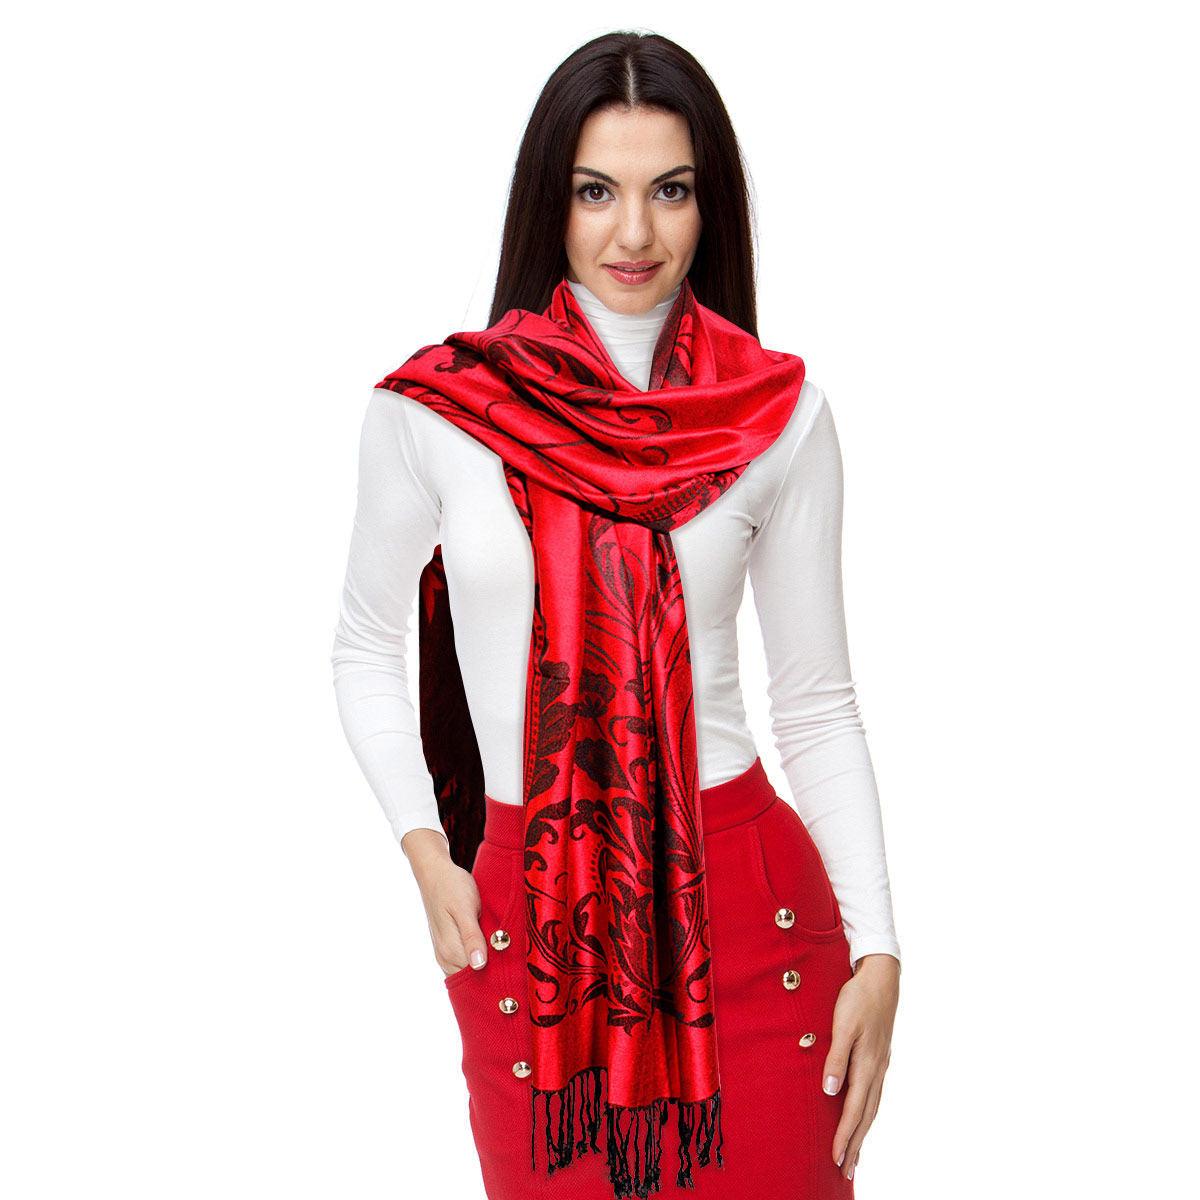 Step into timeless fashion with our Women's Pashmina Red Flower Fringe Scarf